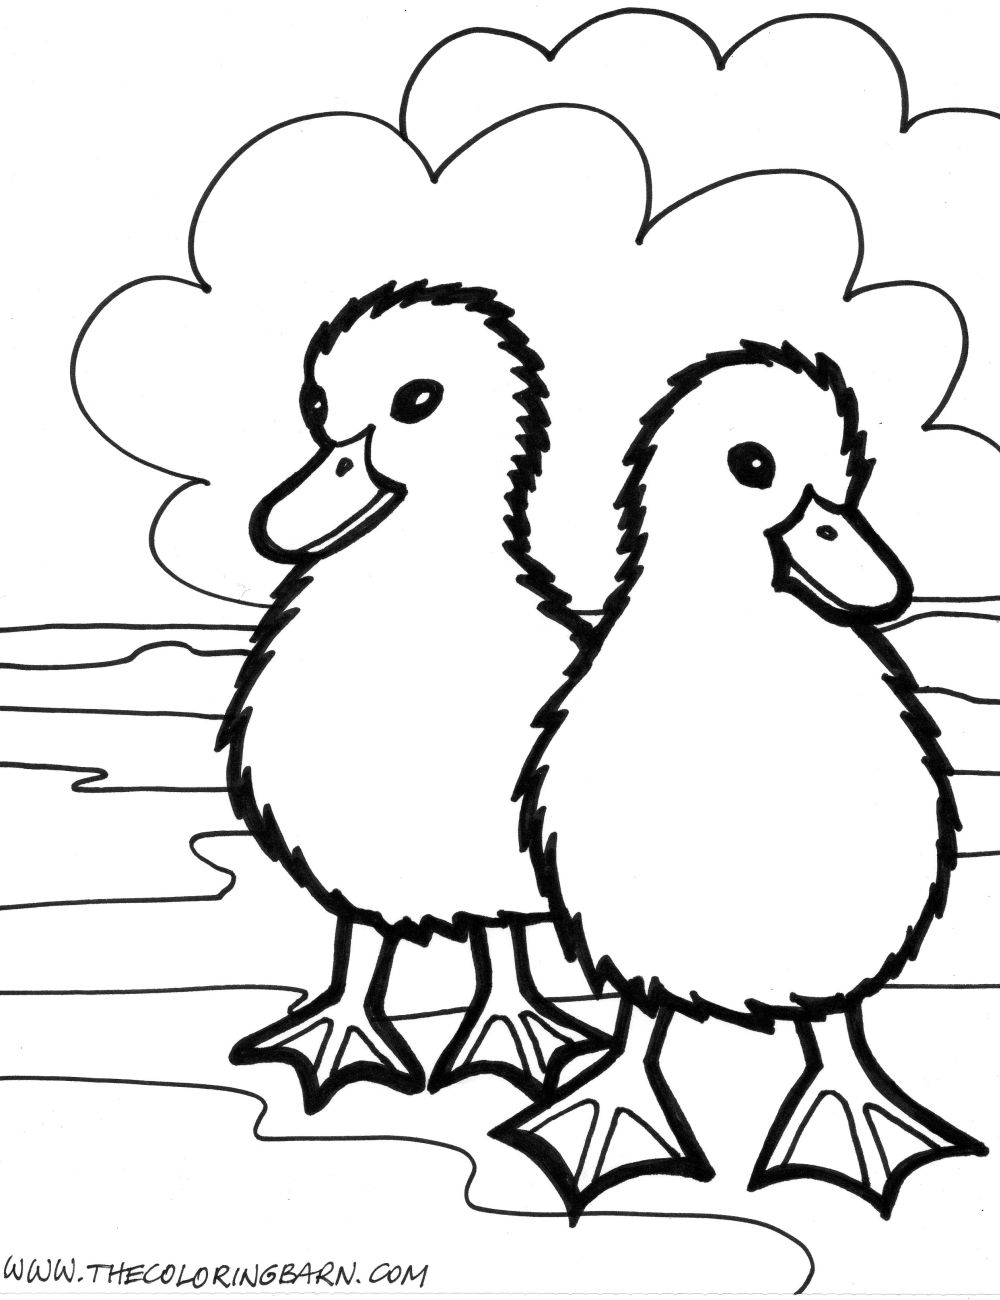 Free Coloring Pages 3 Coloring Pictures Of Animals - Gianfreda.net